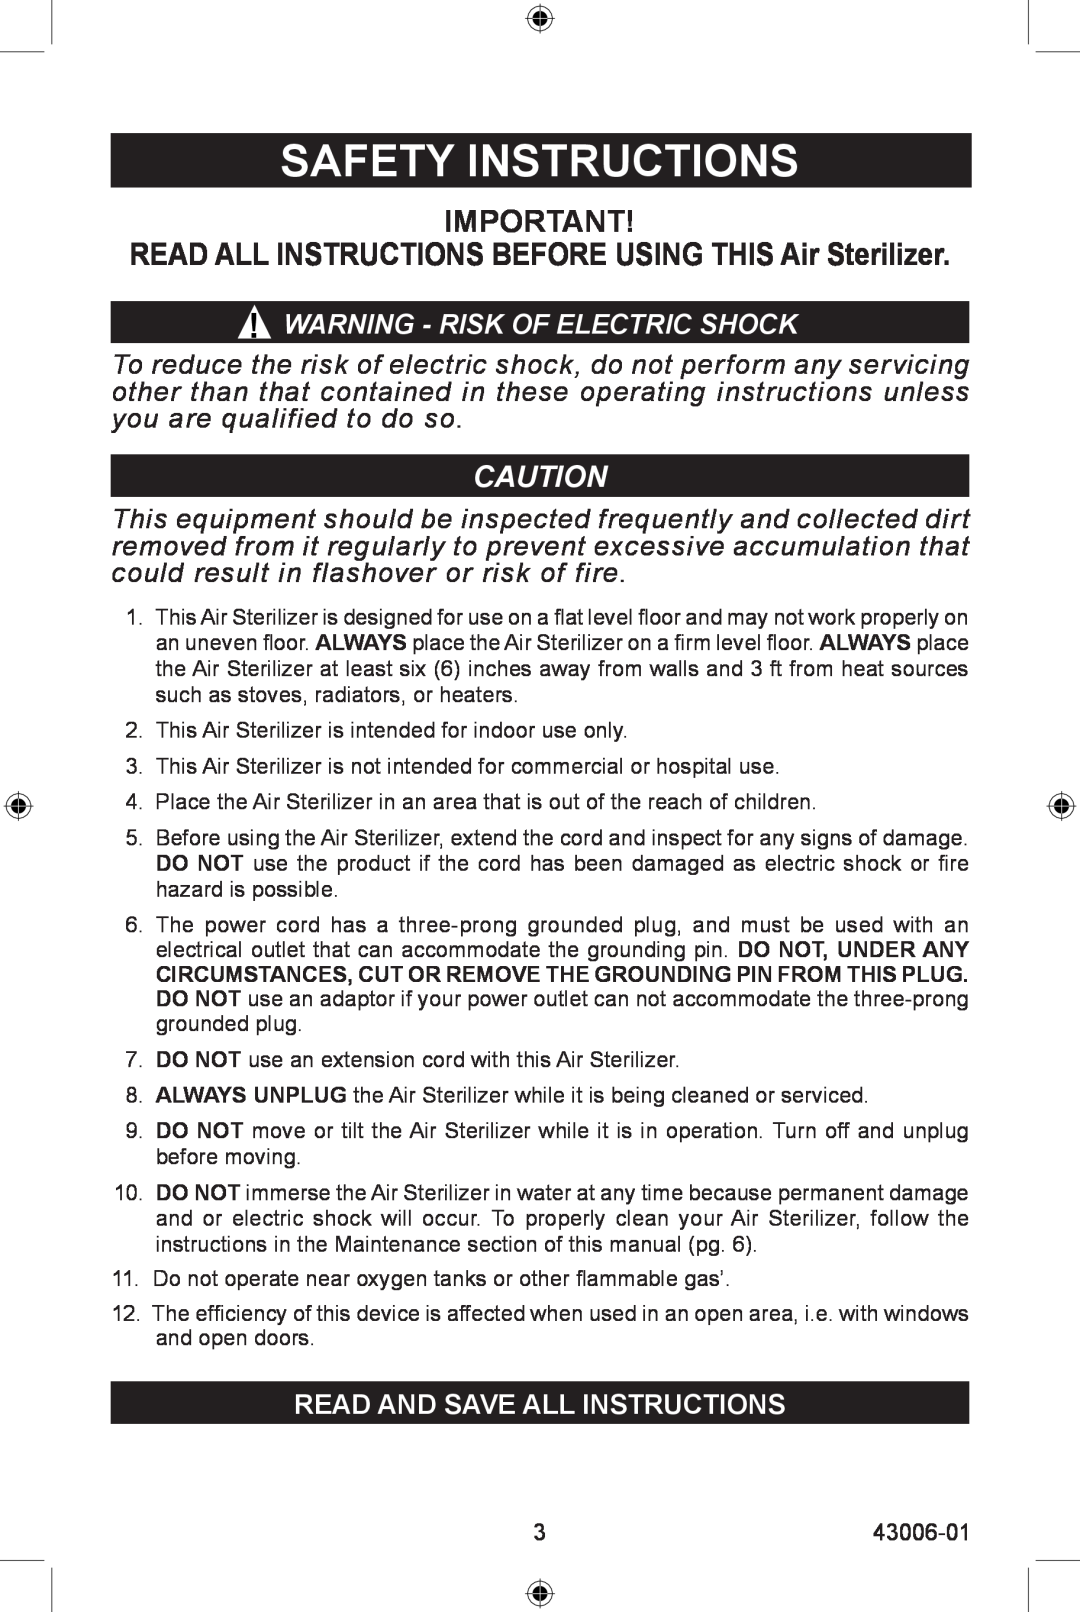 Hunter Fan 30987 manual Safety Instructions, Warning - Risk Of Electric Shock, Read And Save All Instructions 